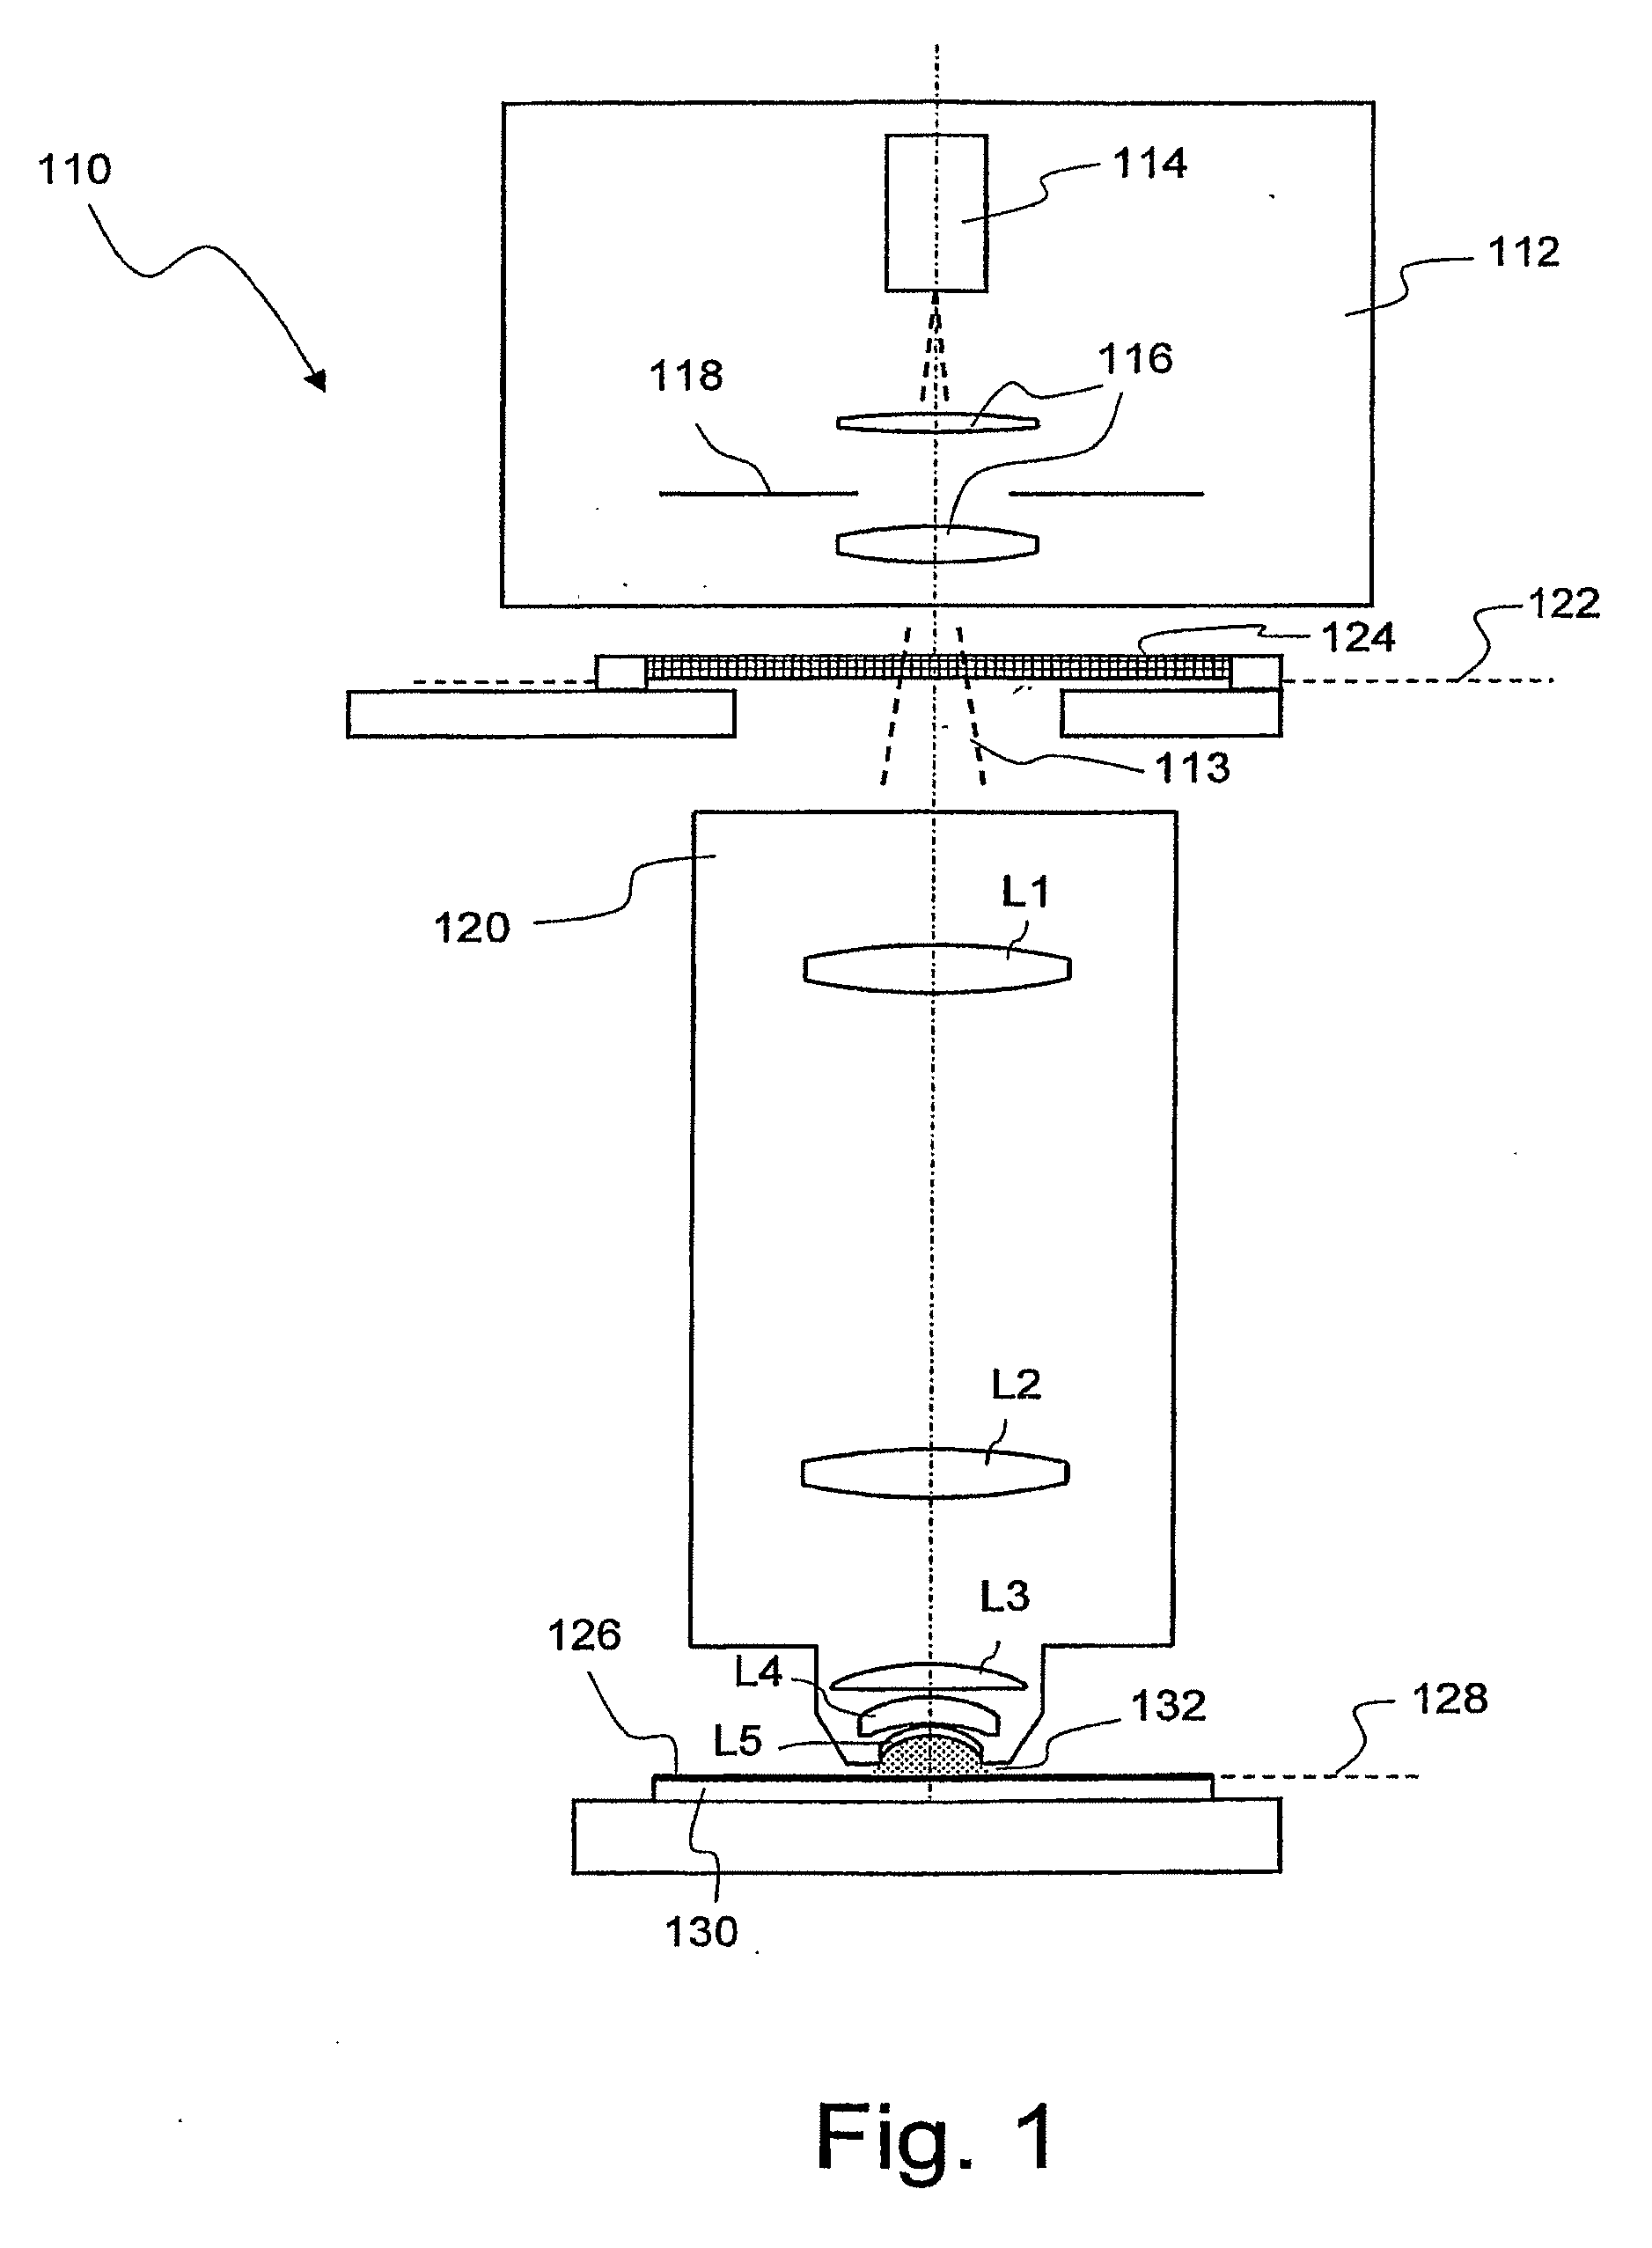 Projection objective for a microlithographic projection exposure apparatus